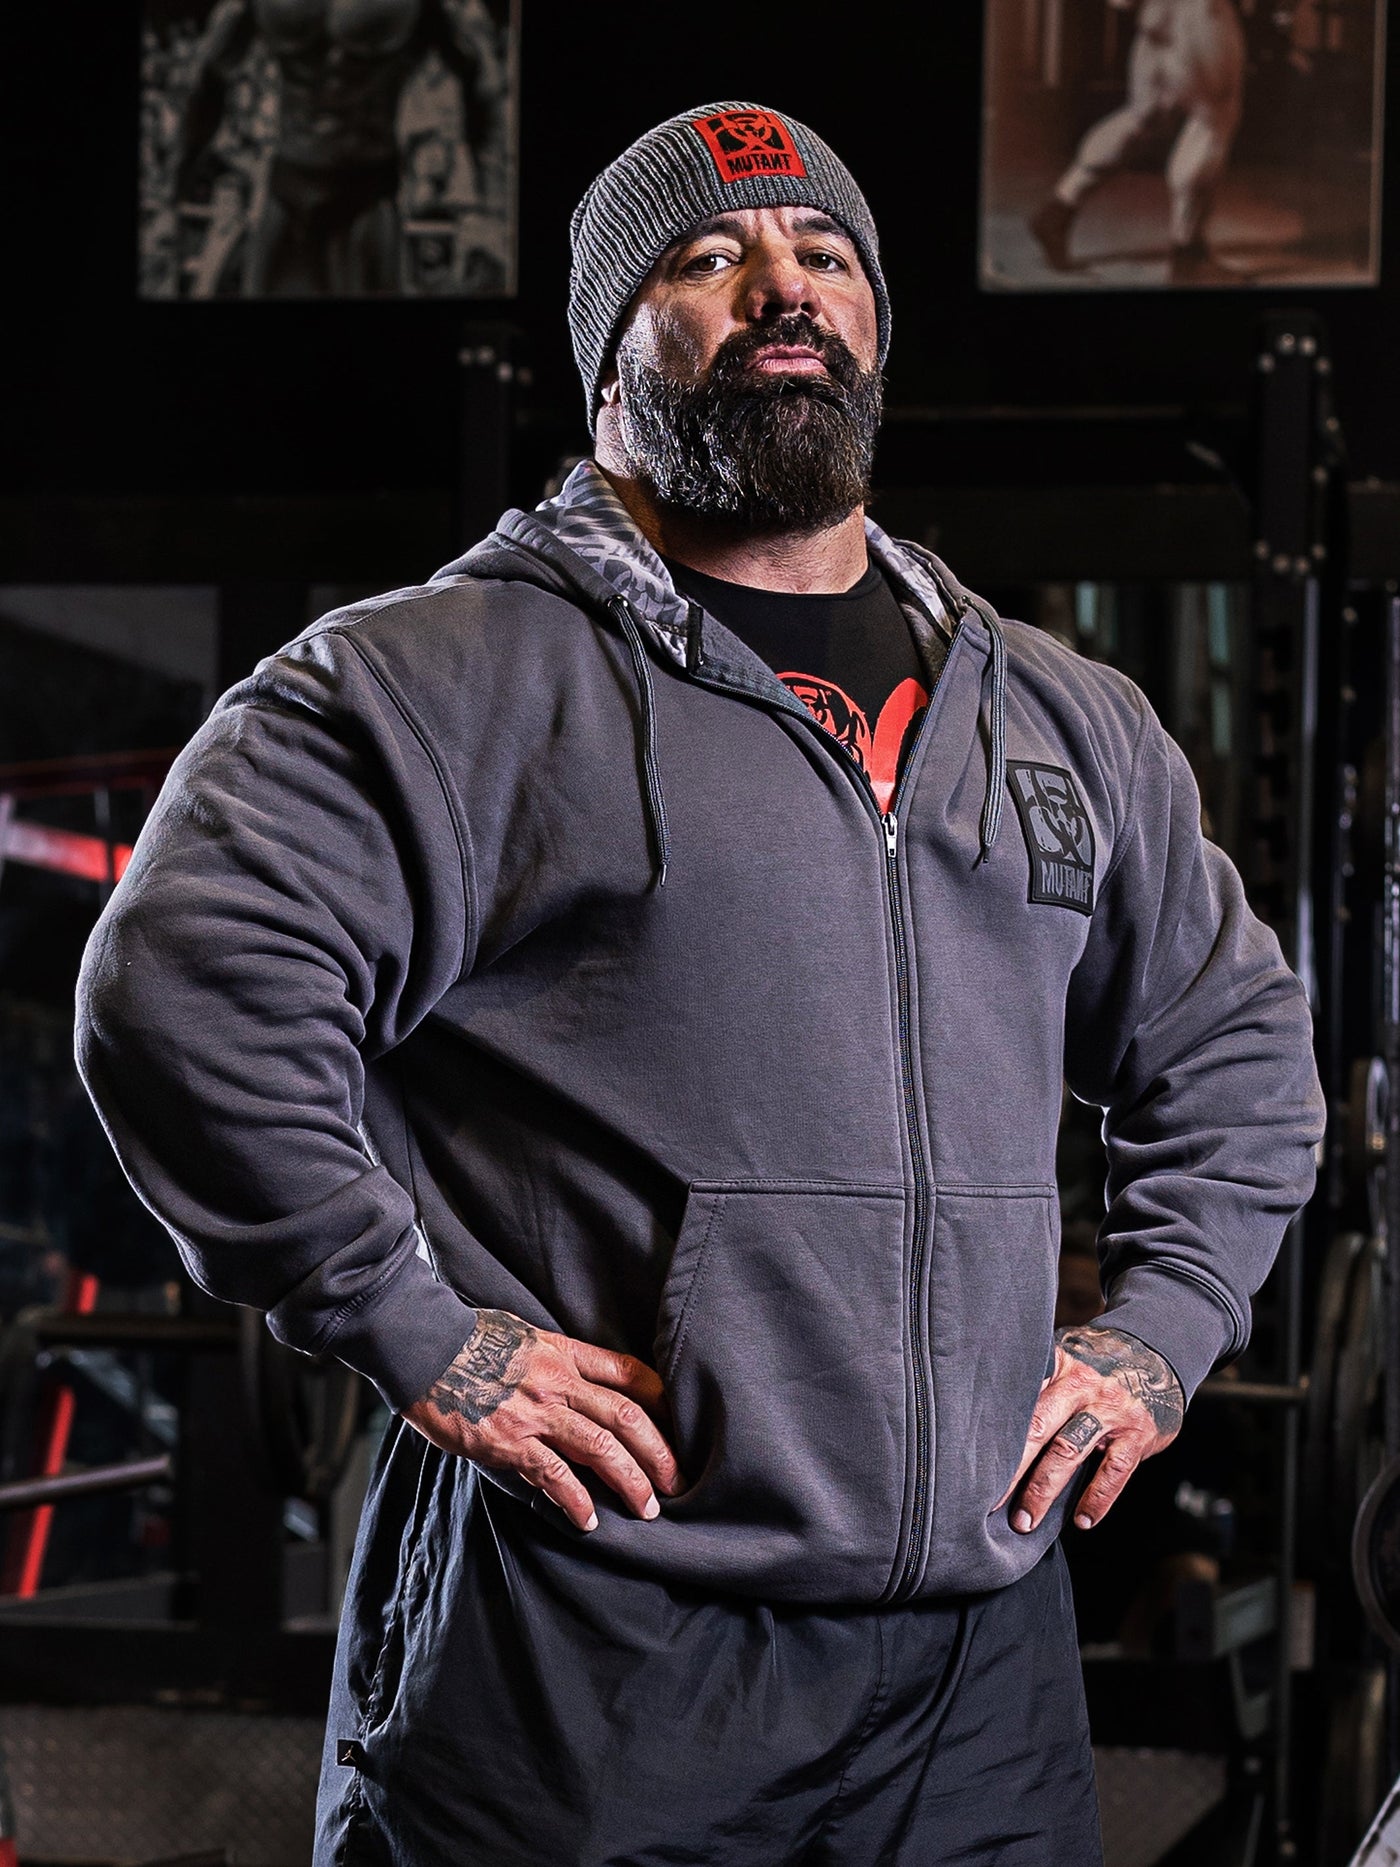 Dusty Hanshaw posing in the gym wearing Grey Mutant Patched Zip-Up Gym Hoodie with black Mutant logo patch on left chest. Two pockets and light grey hood lining with watermarked Mutant logo.